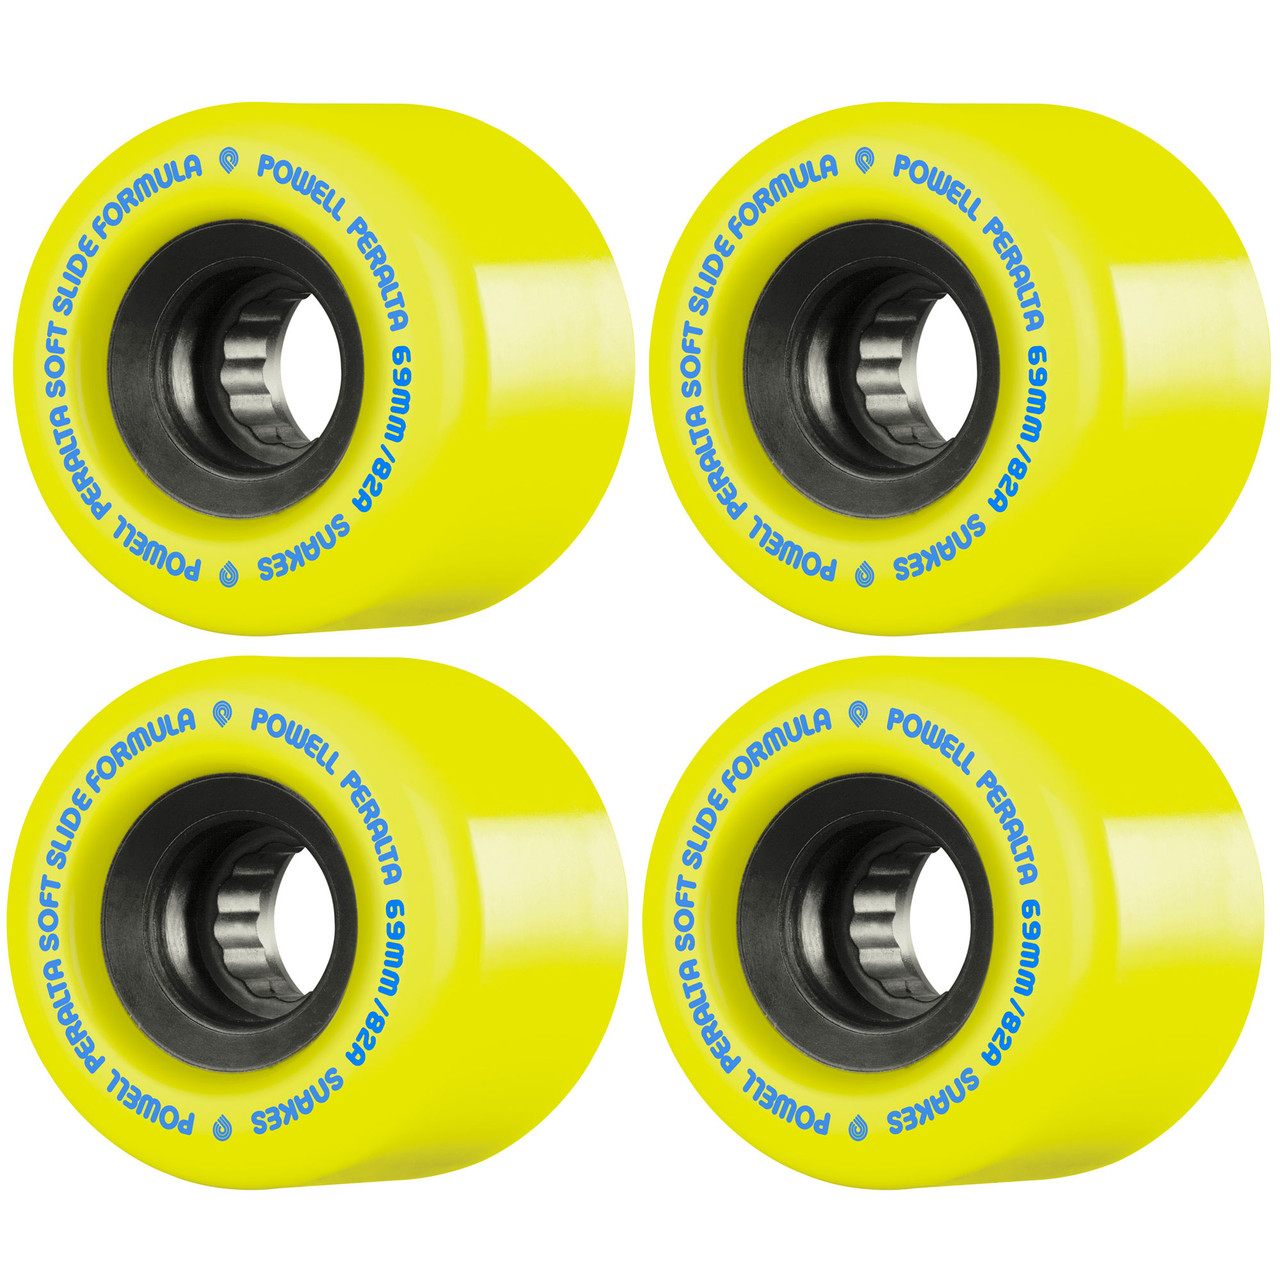 POWELL PERALTA Snakes SSF 82a yellow